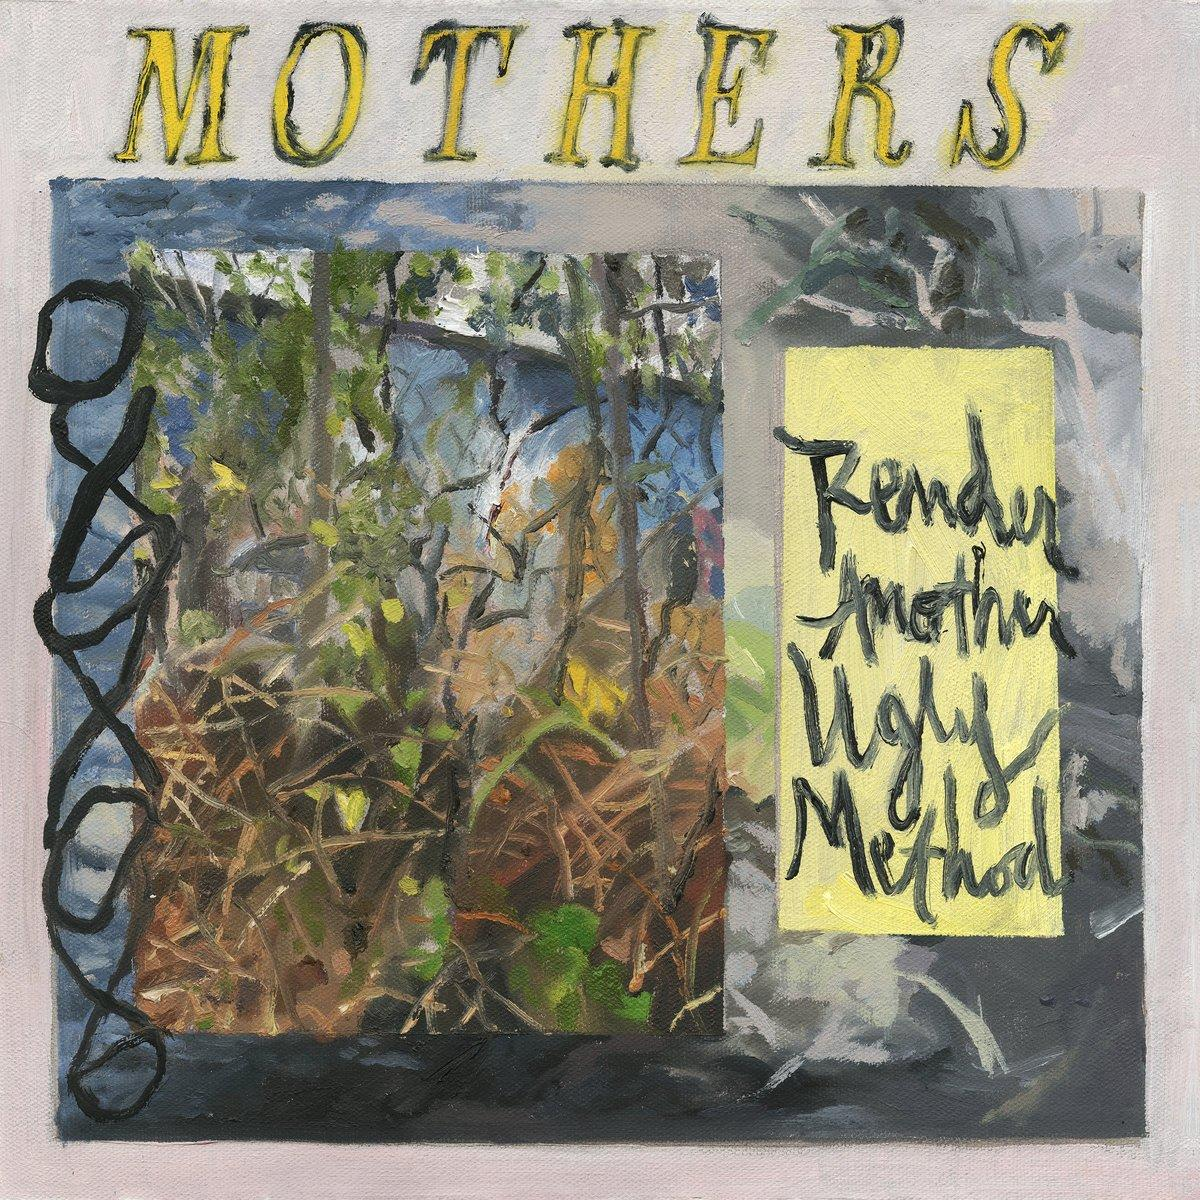 The Mothers - Render Another Method Ugly - (CD)